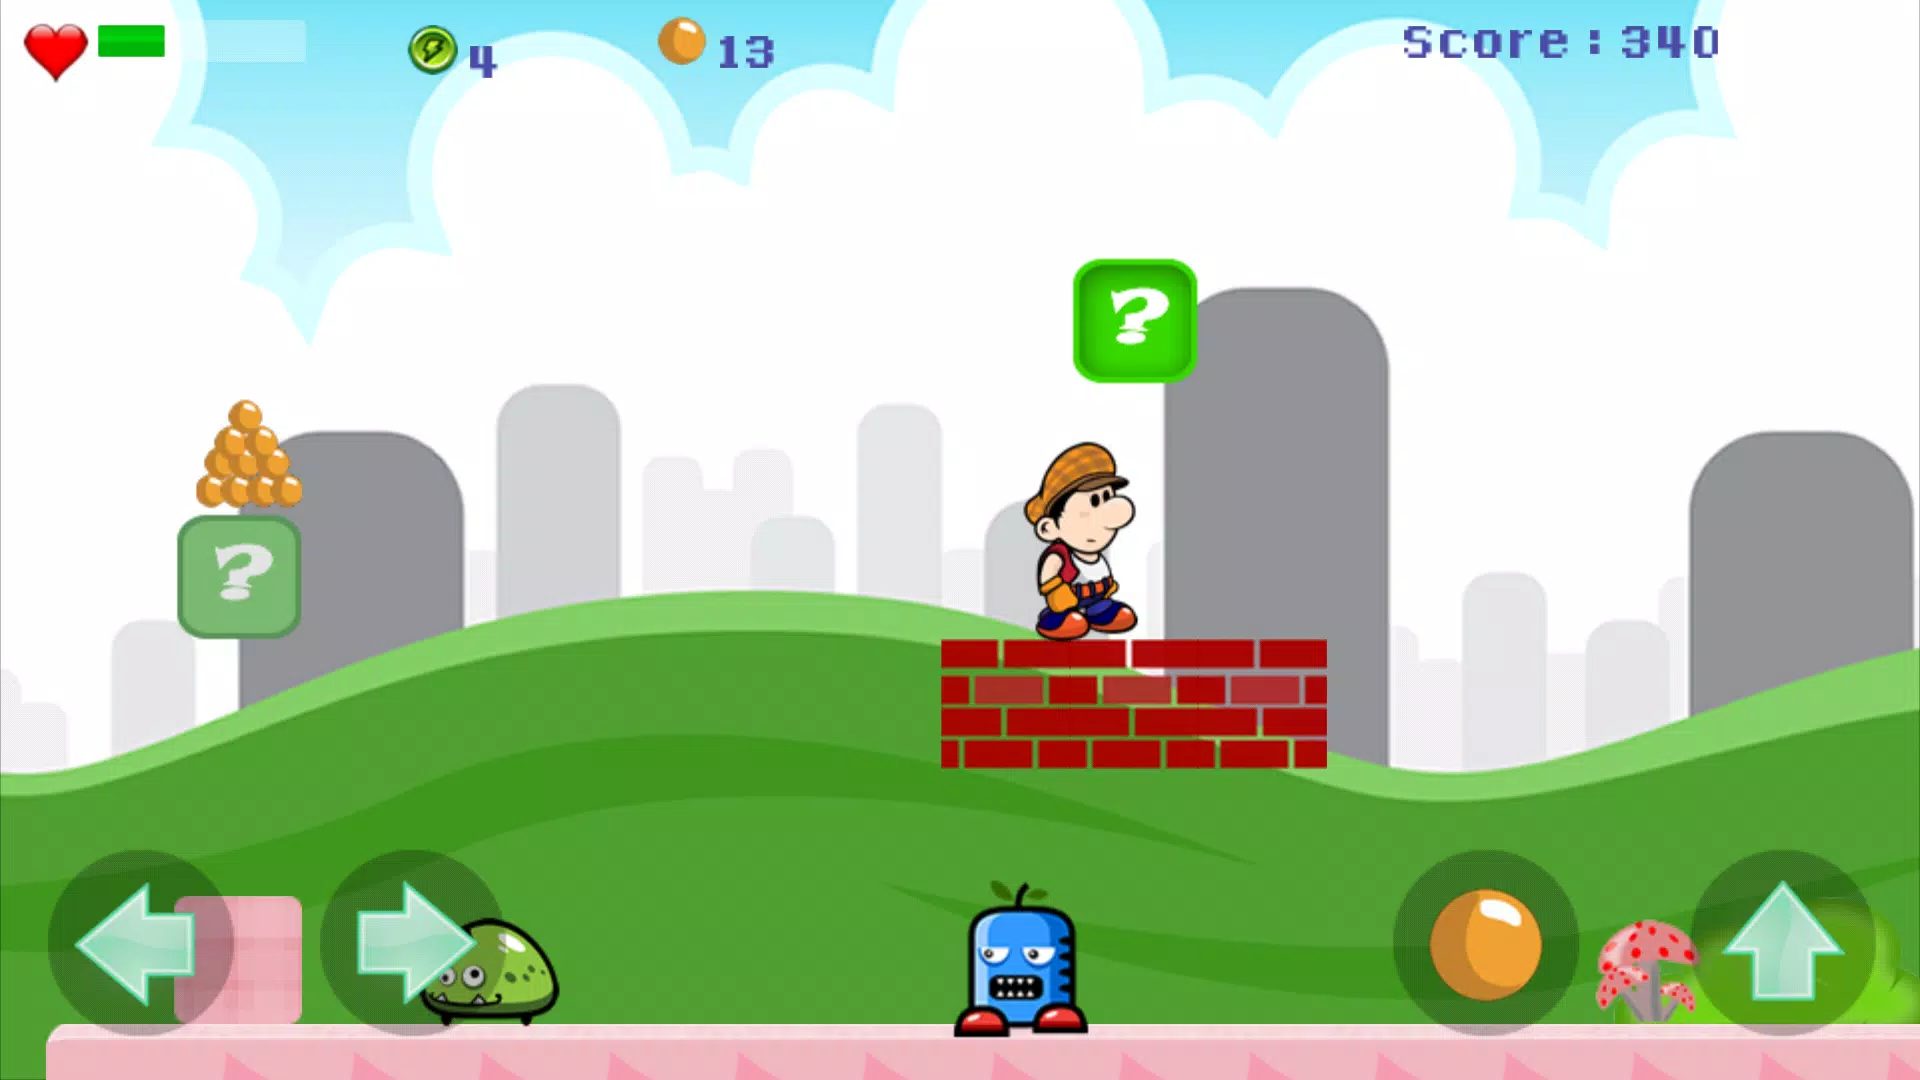 Ashleys Adventure World APK for Android - Download